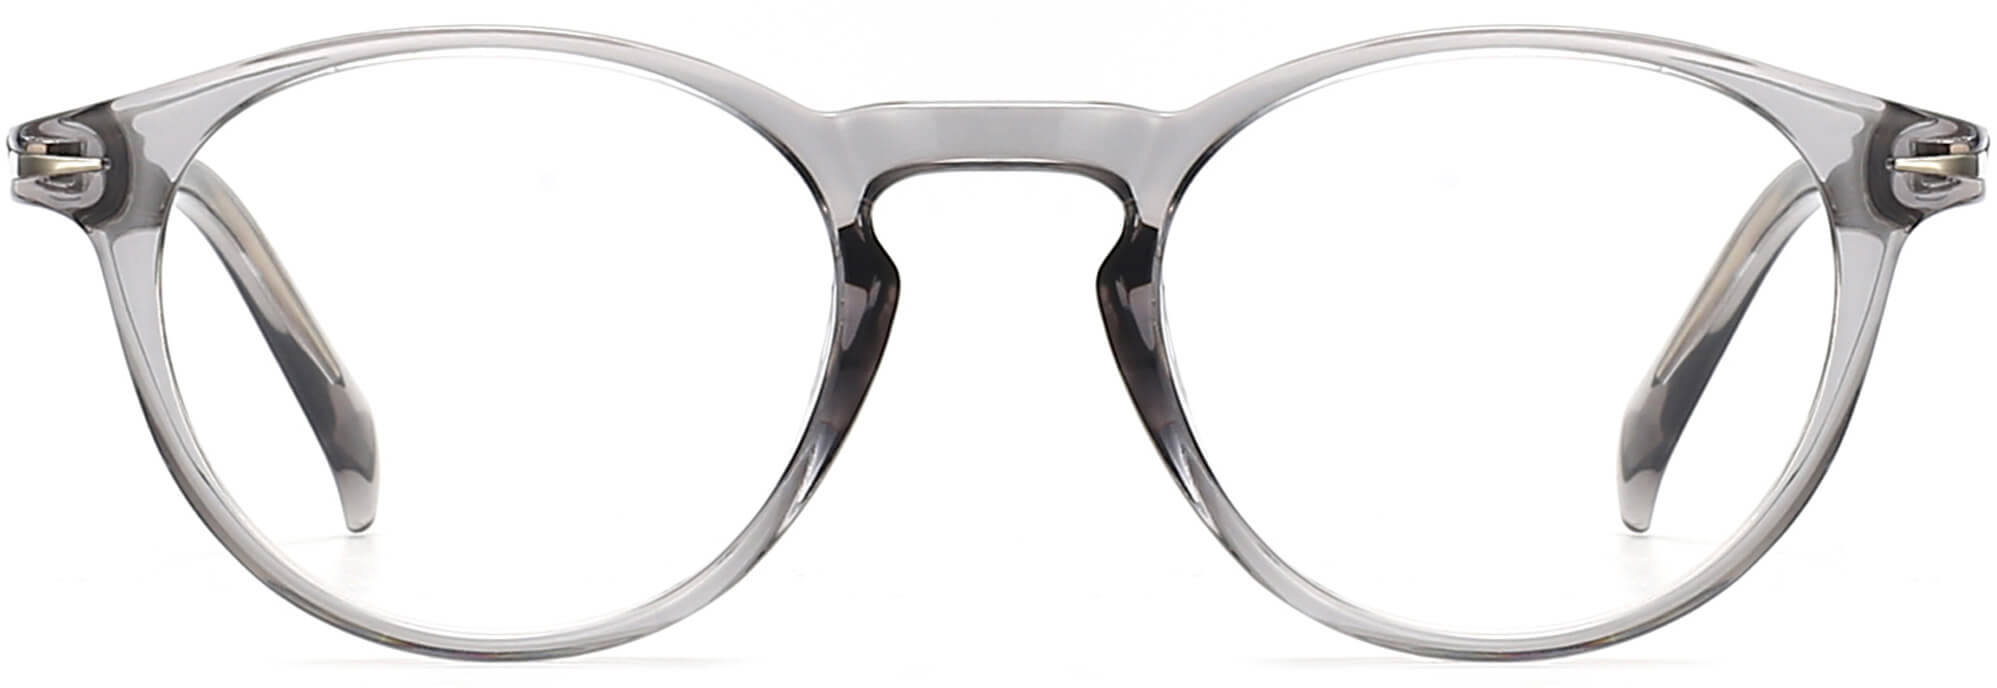 Romeo Round Gray Eyeglasses from ANRRI, front view